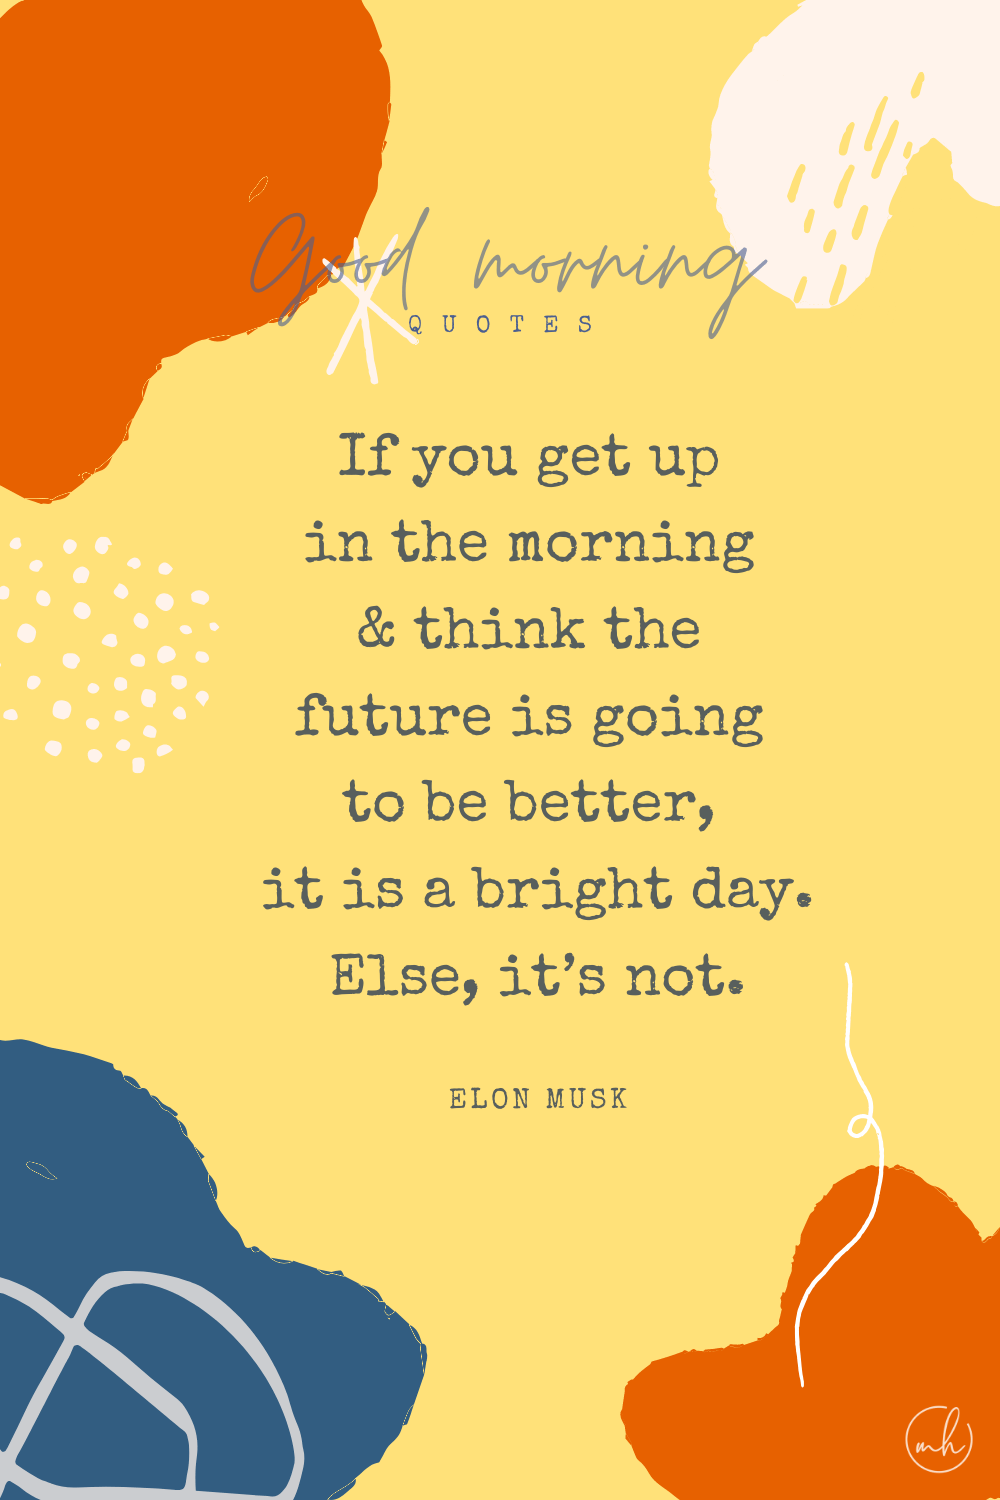 "If you get up in the morning and think the future is going to be better, it is a bright day. Otherwise, it’s not." – Elon Musk